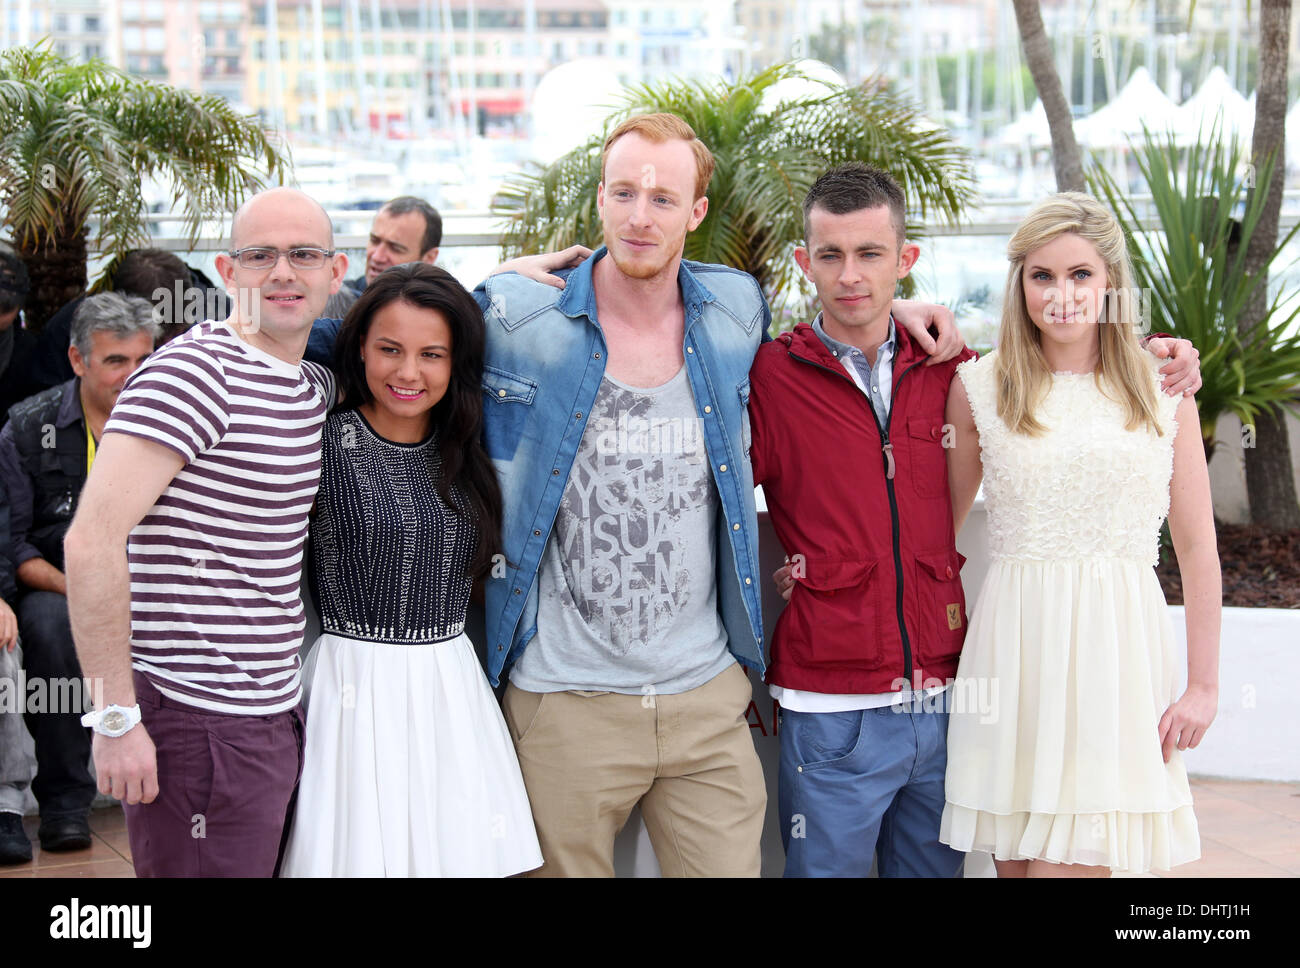 Charlie Maclean, Gary Maitland, Jasmin Riggins, William Ruane, Paul Brannigan, Siobhan Reilly 'The Angel's Share' photocall during the 65th Cannes Film Festival Cannes, France - 22.05.12 Stock Photo